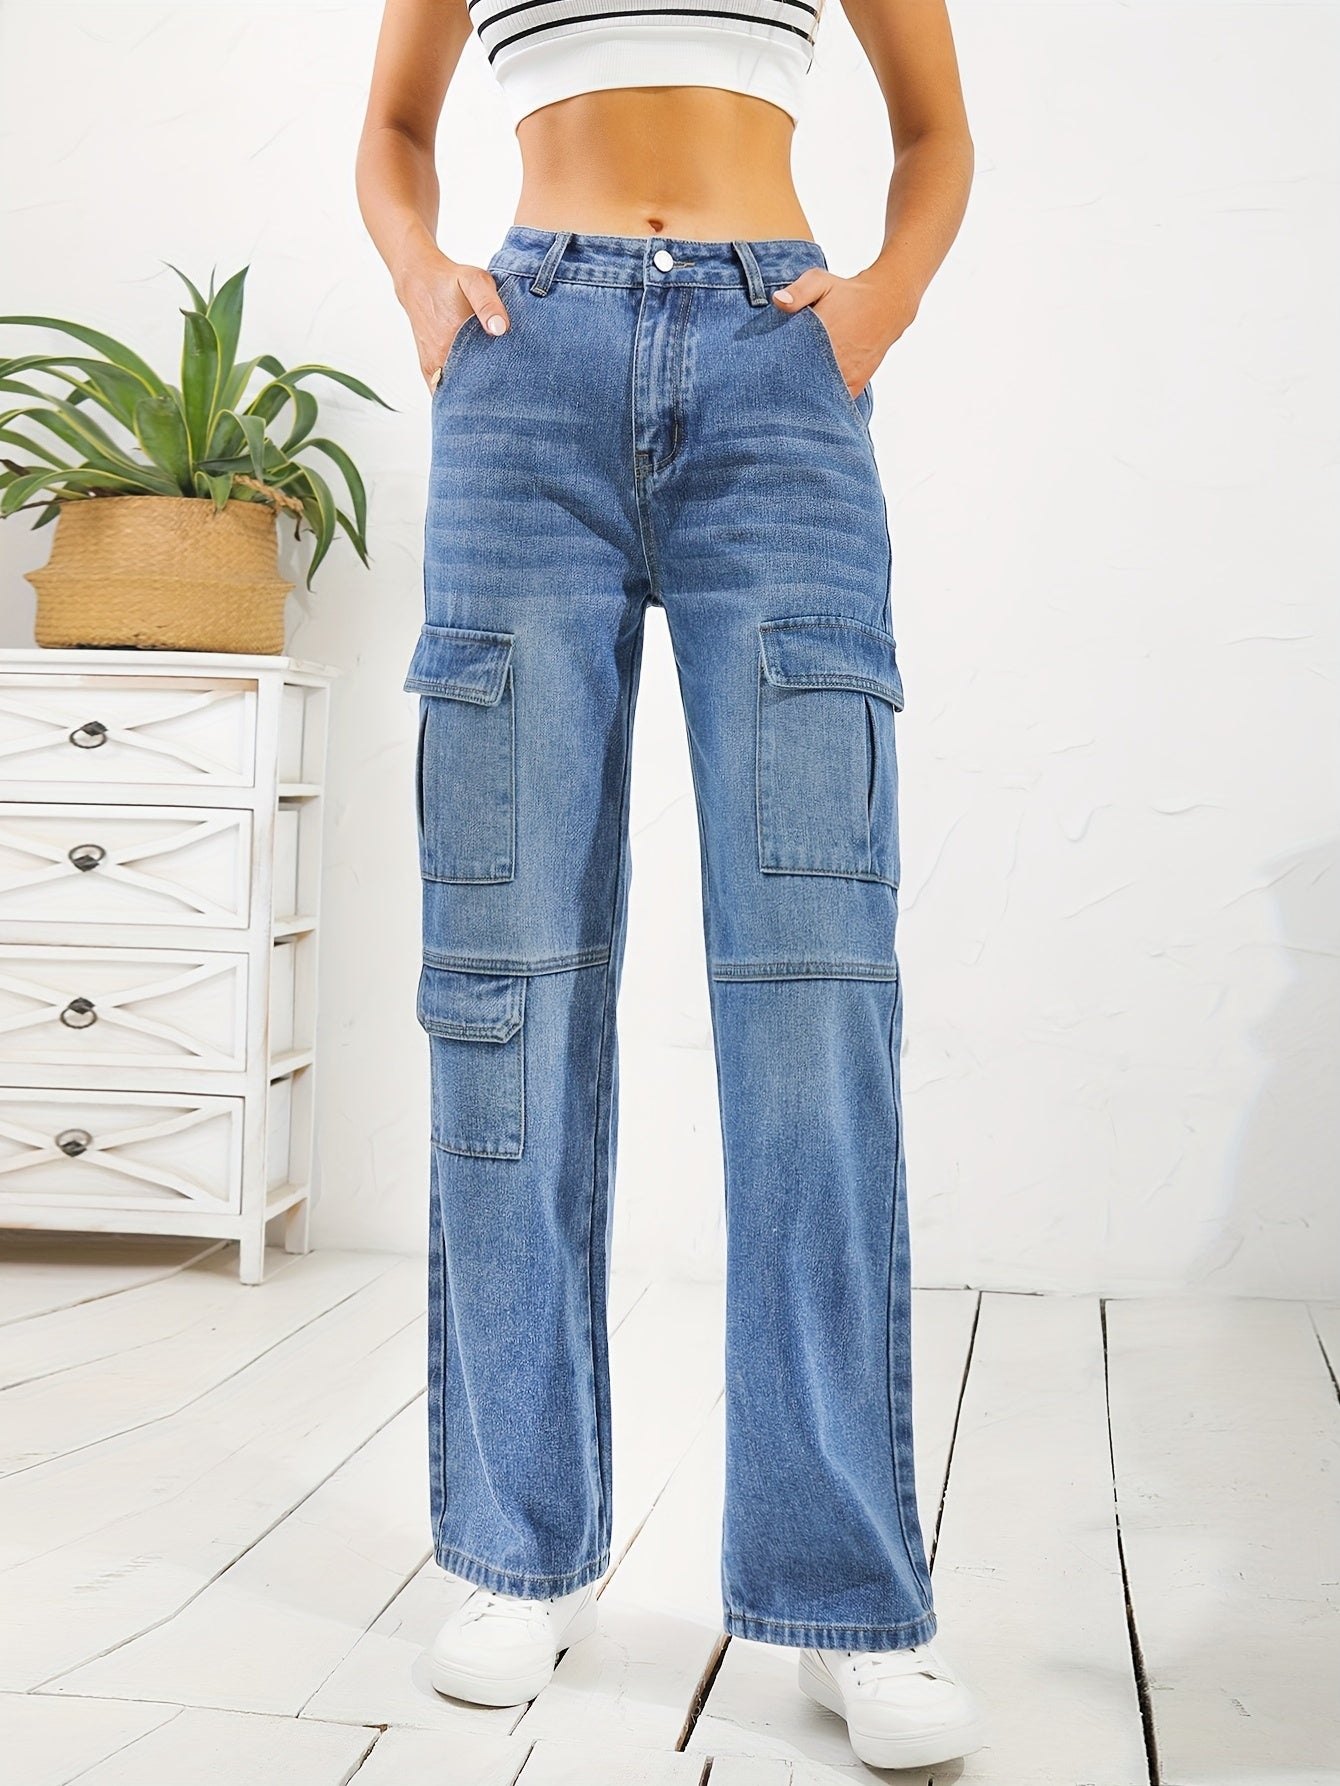 「binfenxie」Flap Cargo Pocket Whiskering Denim Pants, Water Ripple Embossed Crotch Loose Straight Leg Jeans, Causal Pants For Every Day, Women's Denim Jeans & Clothing